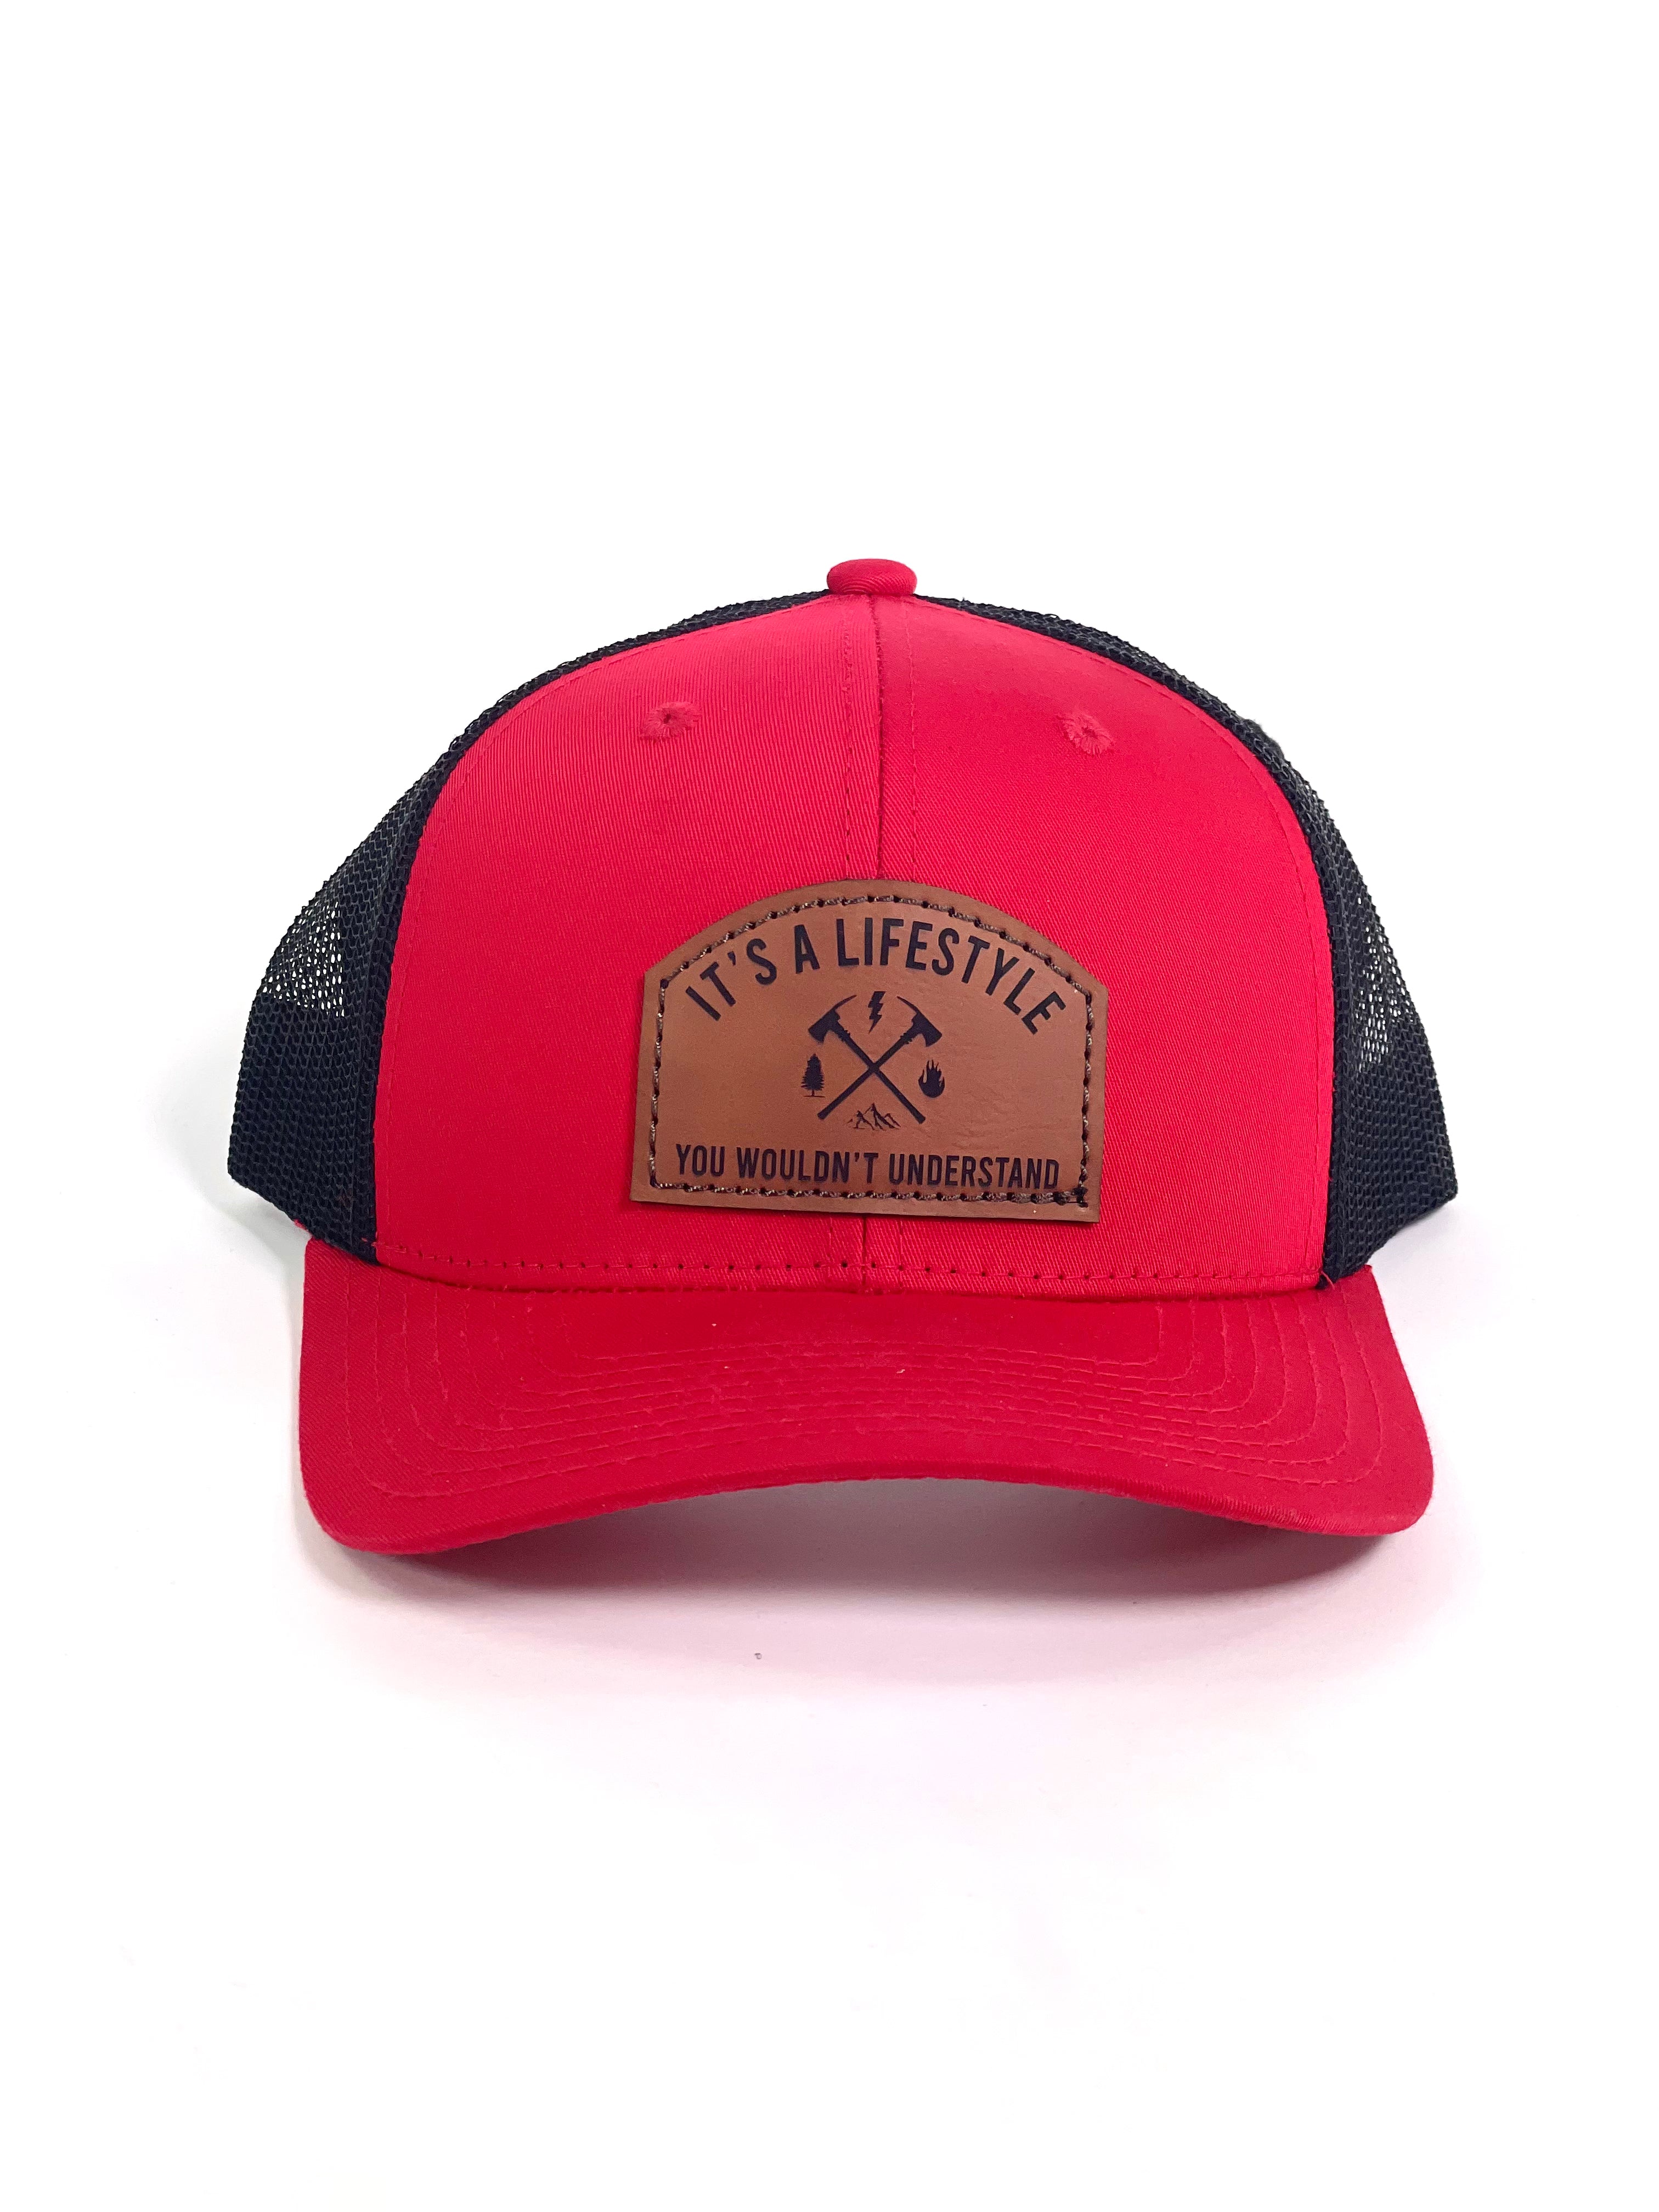 LIFESTYLE LEATHER PATCH HATS – Hotshot Coffee Roasters